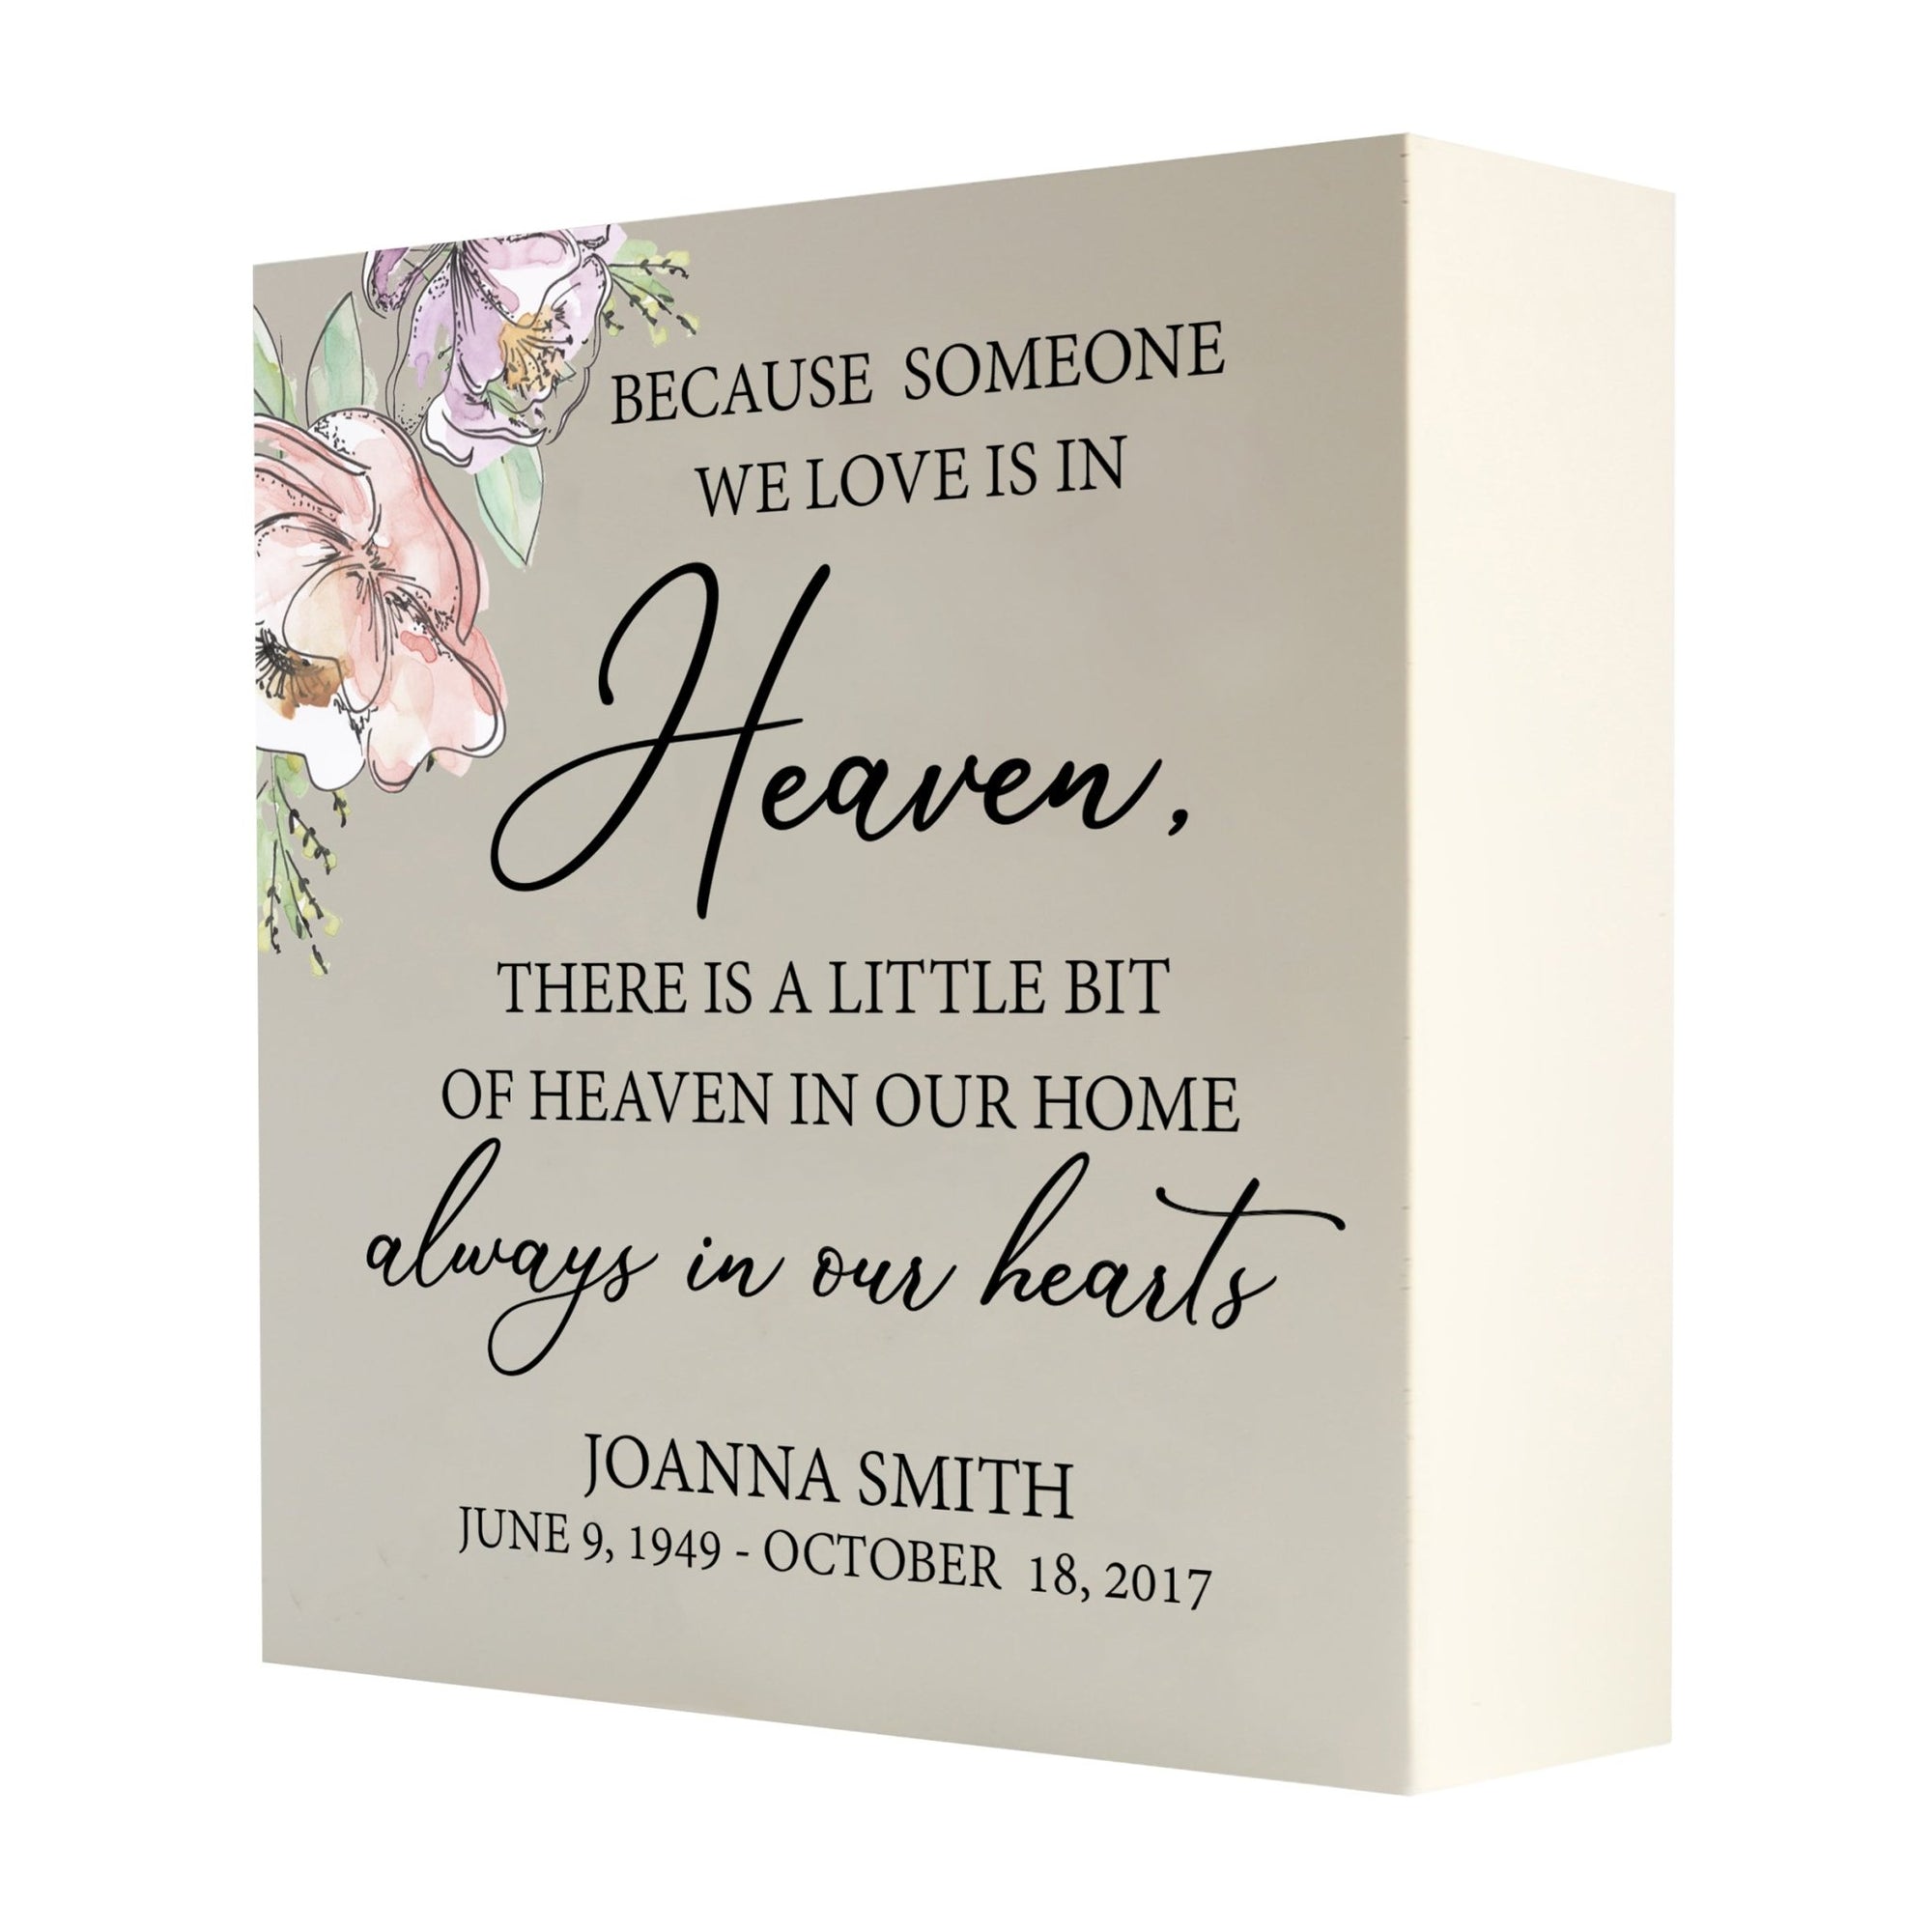 Personalized Modern Inspirational Memorial Wooden Shadow Box and Urn 10x10 holds 189 cu in of Human Ashes - Because Someone We Love (Ivory) - LifeSong Milestones